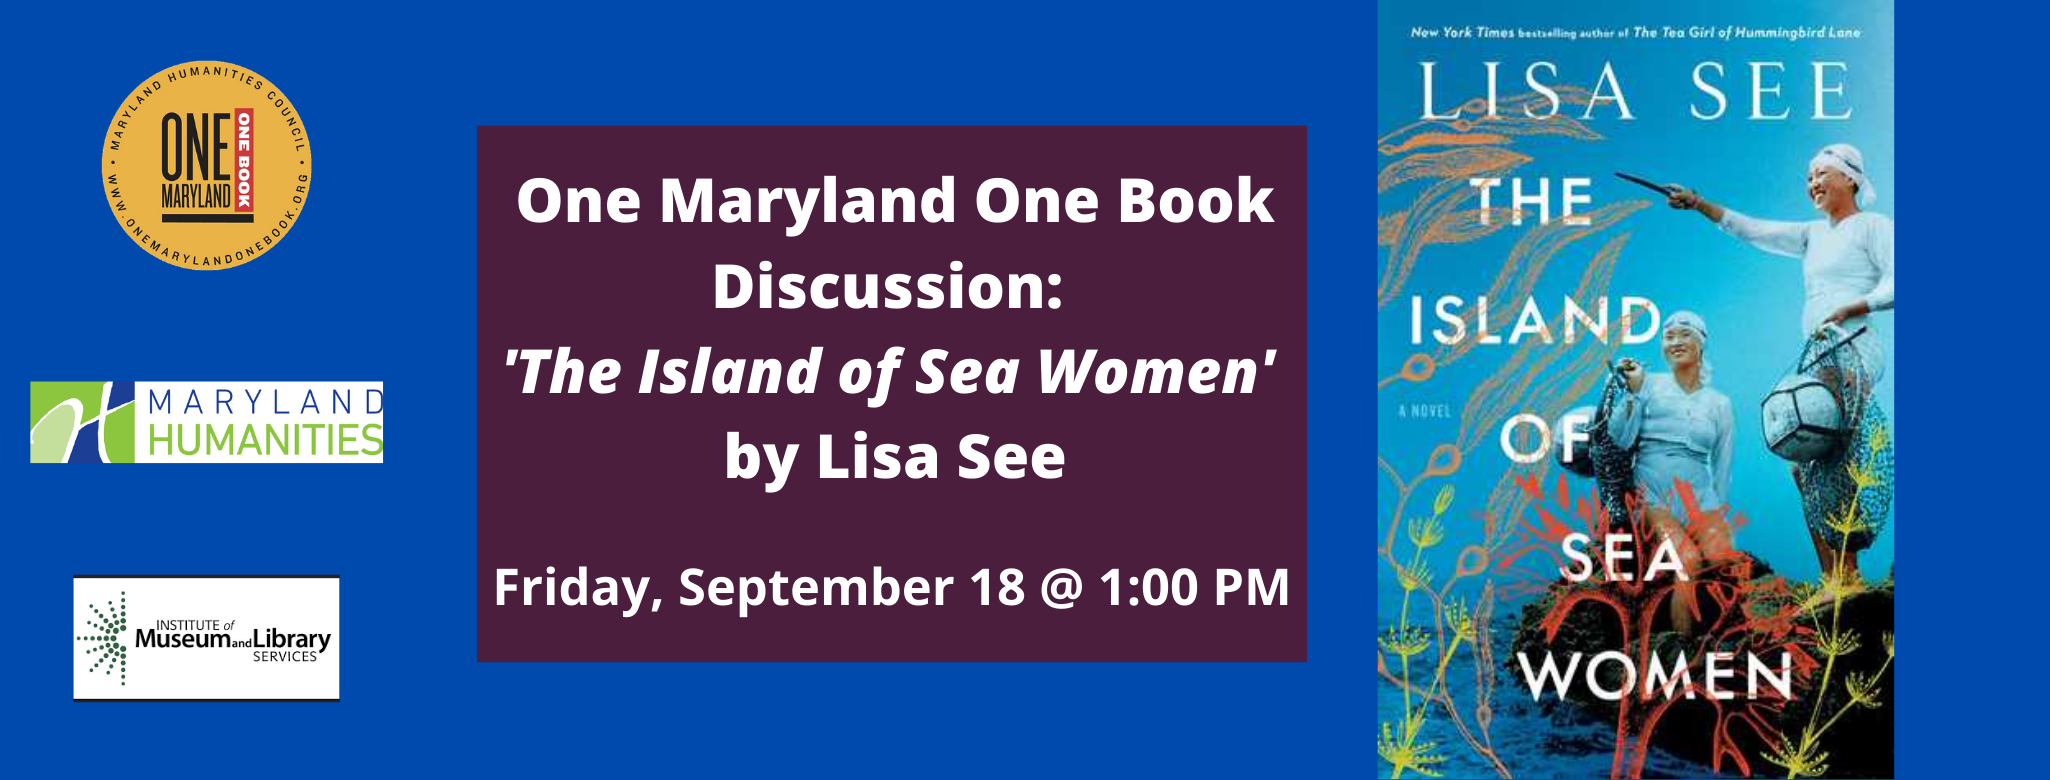 One Maryland One Book Discussion: 'The Island of Sea Women' by Lisa See